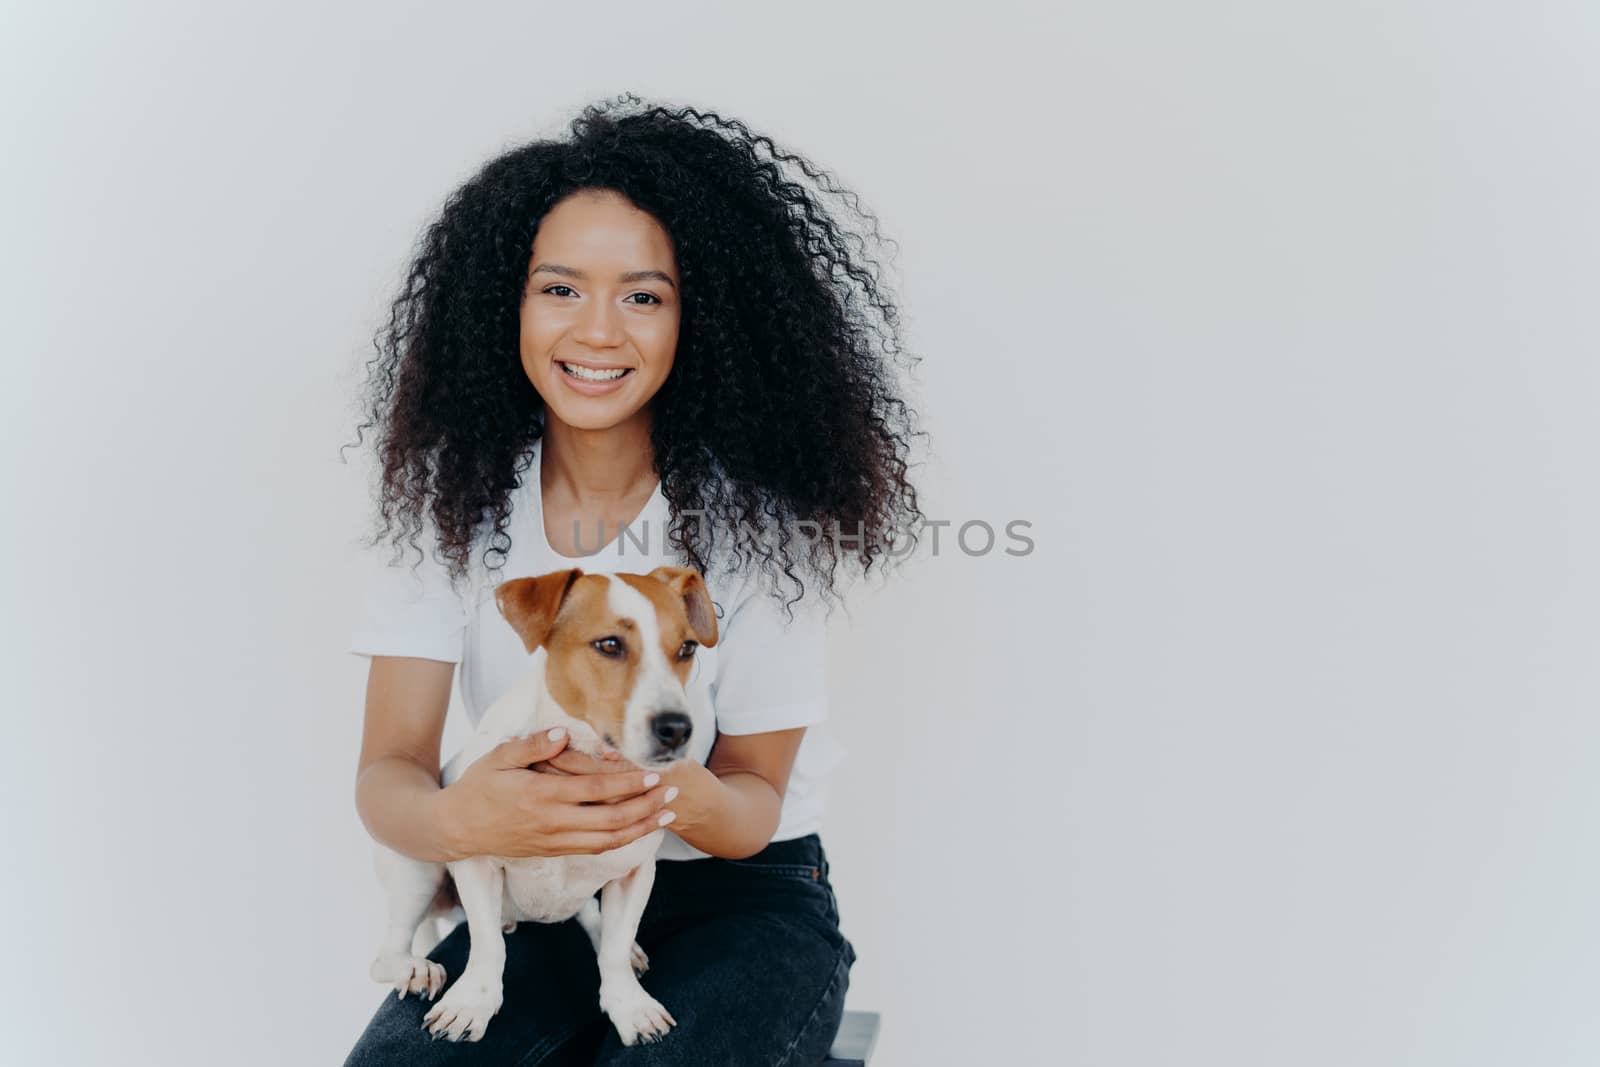 Humans and animals concept. Cheerful good looking woman with crisp hair, smiles pleasantly, plays with pedigree dog, sits on comfortable chair, makes memorable shot, pose against white background by vkstock